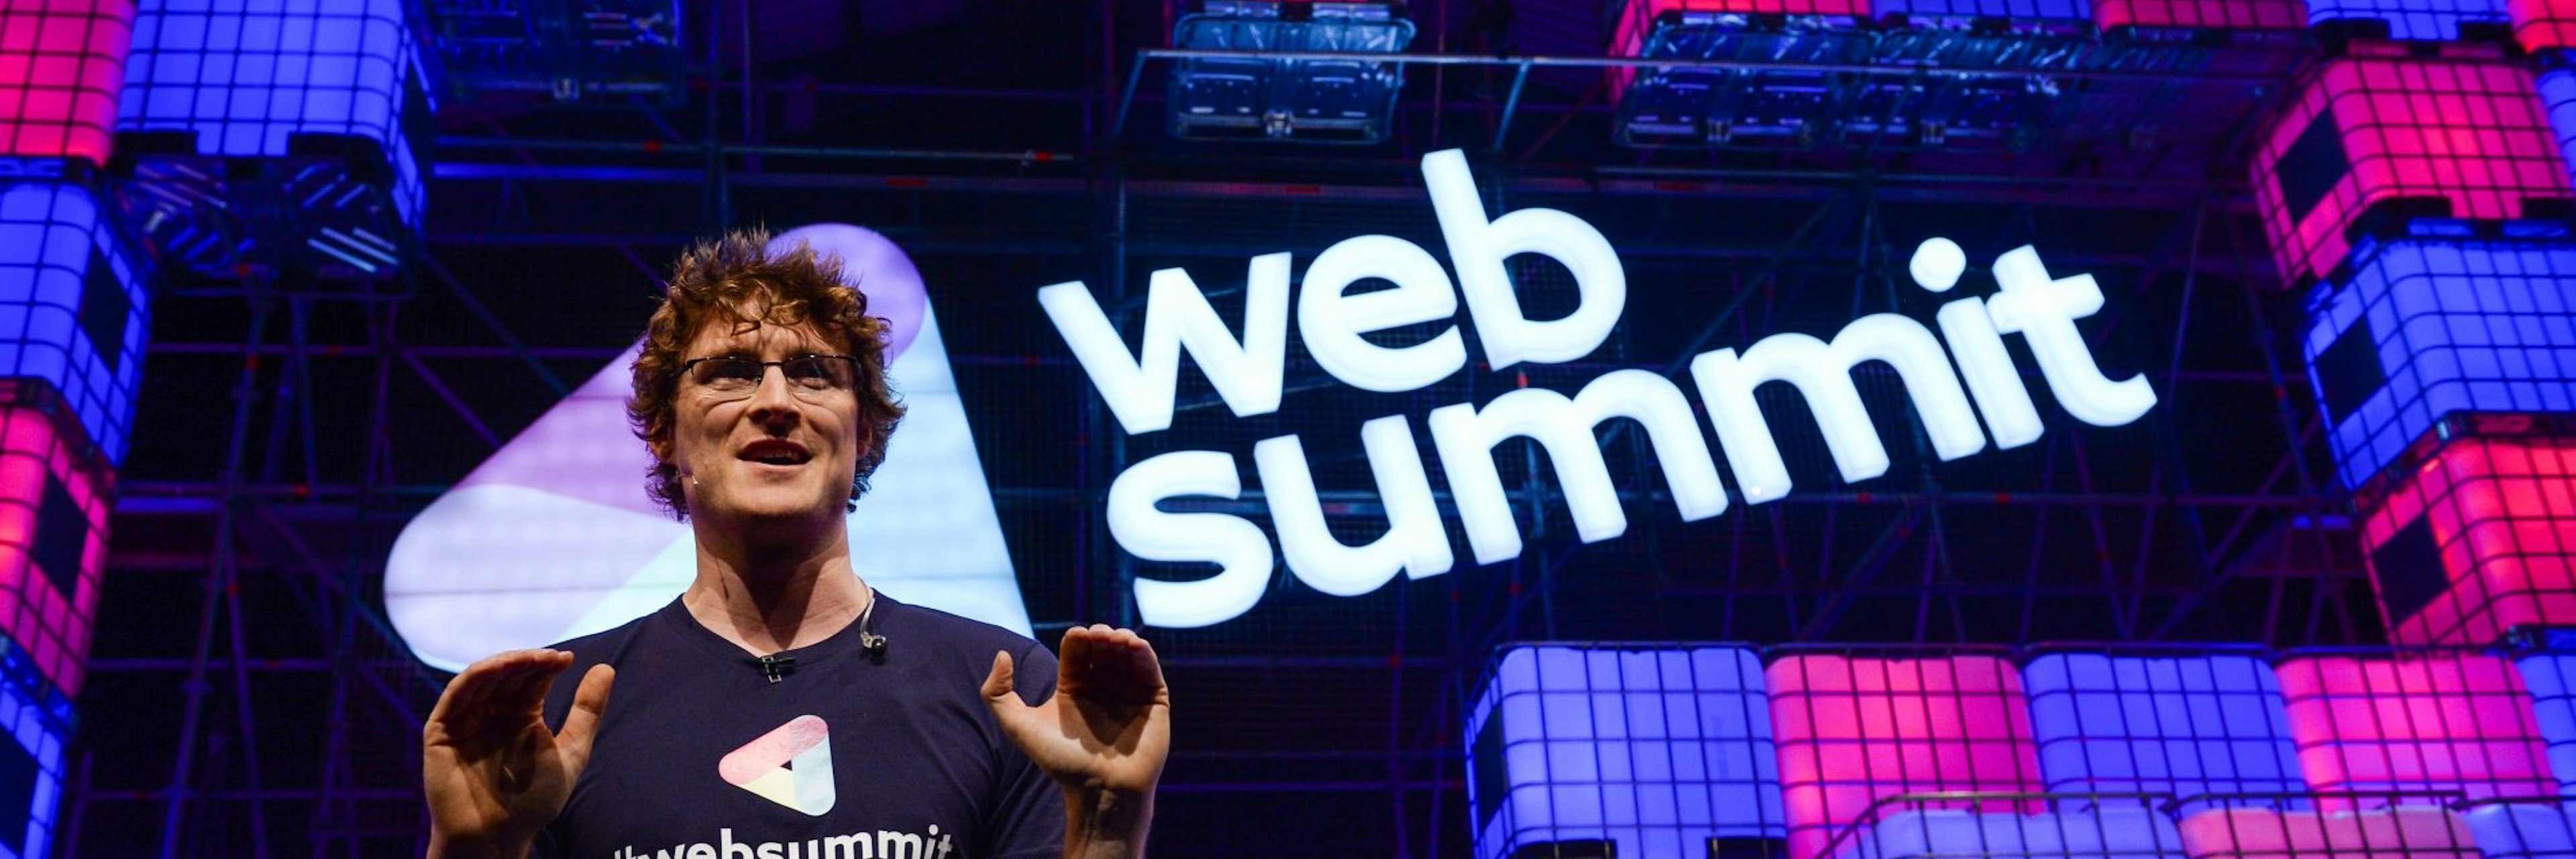 Founder of Web Summit Paddy Cosgrave on stage at the event. Picture credit: Stephen McCarthy / SPORTSFILE / Web Summit